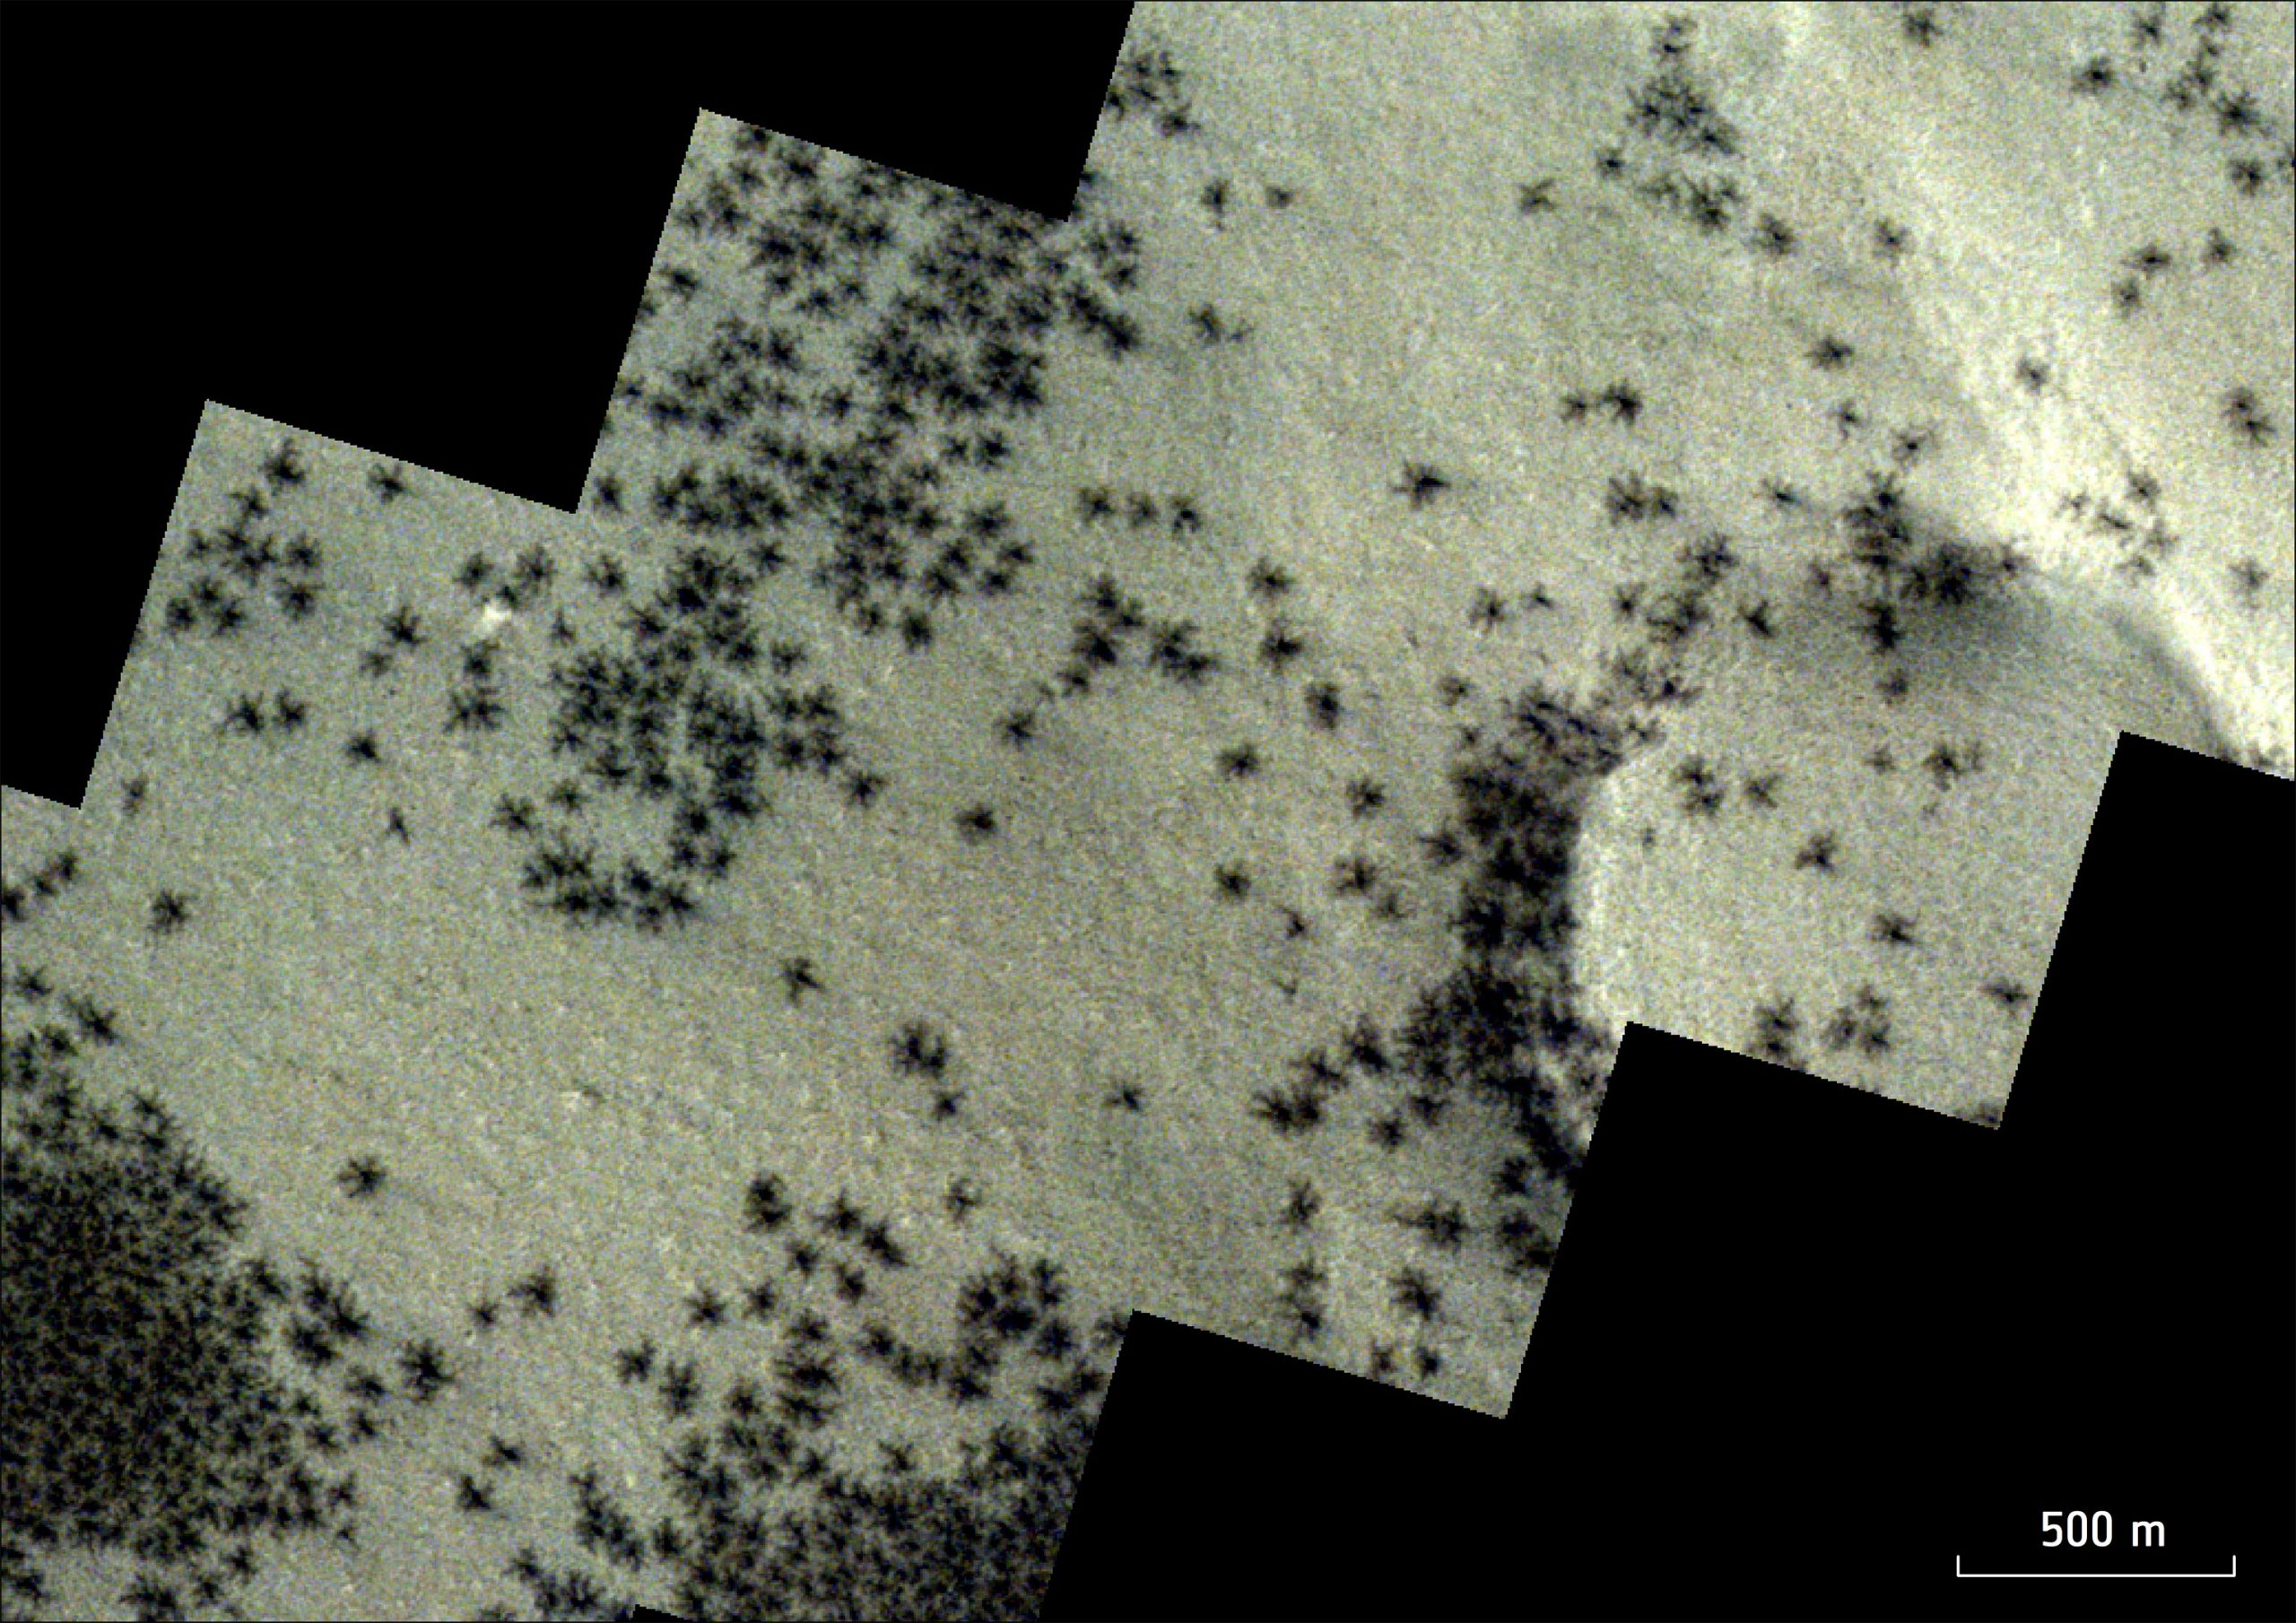 Mars Express Discovers Mysterious Martian “Spiders” - SciTechDaily